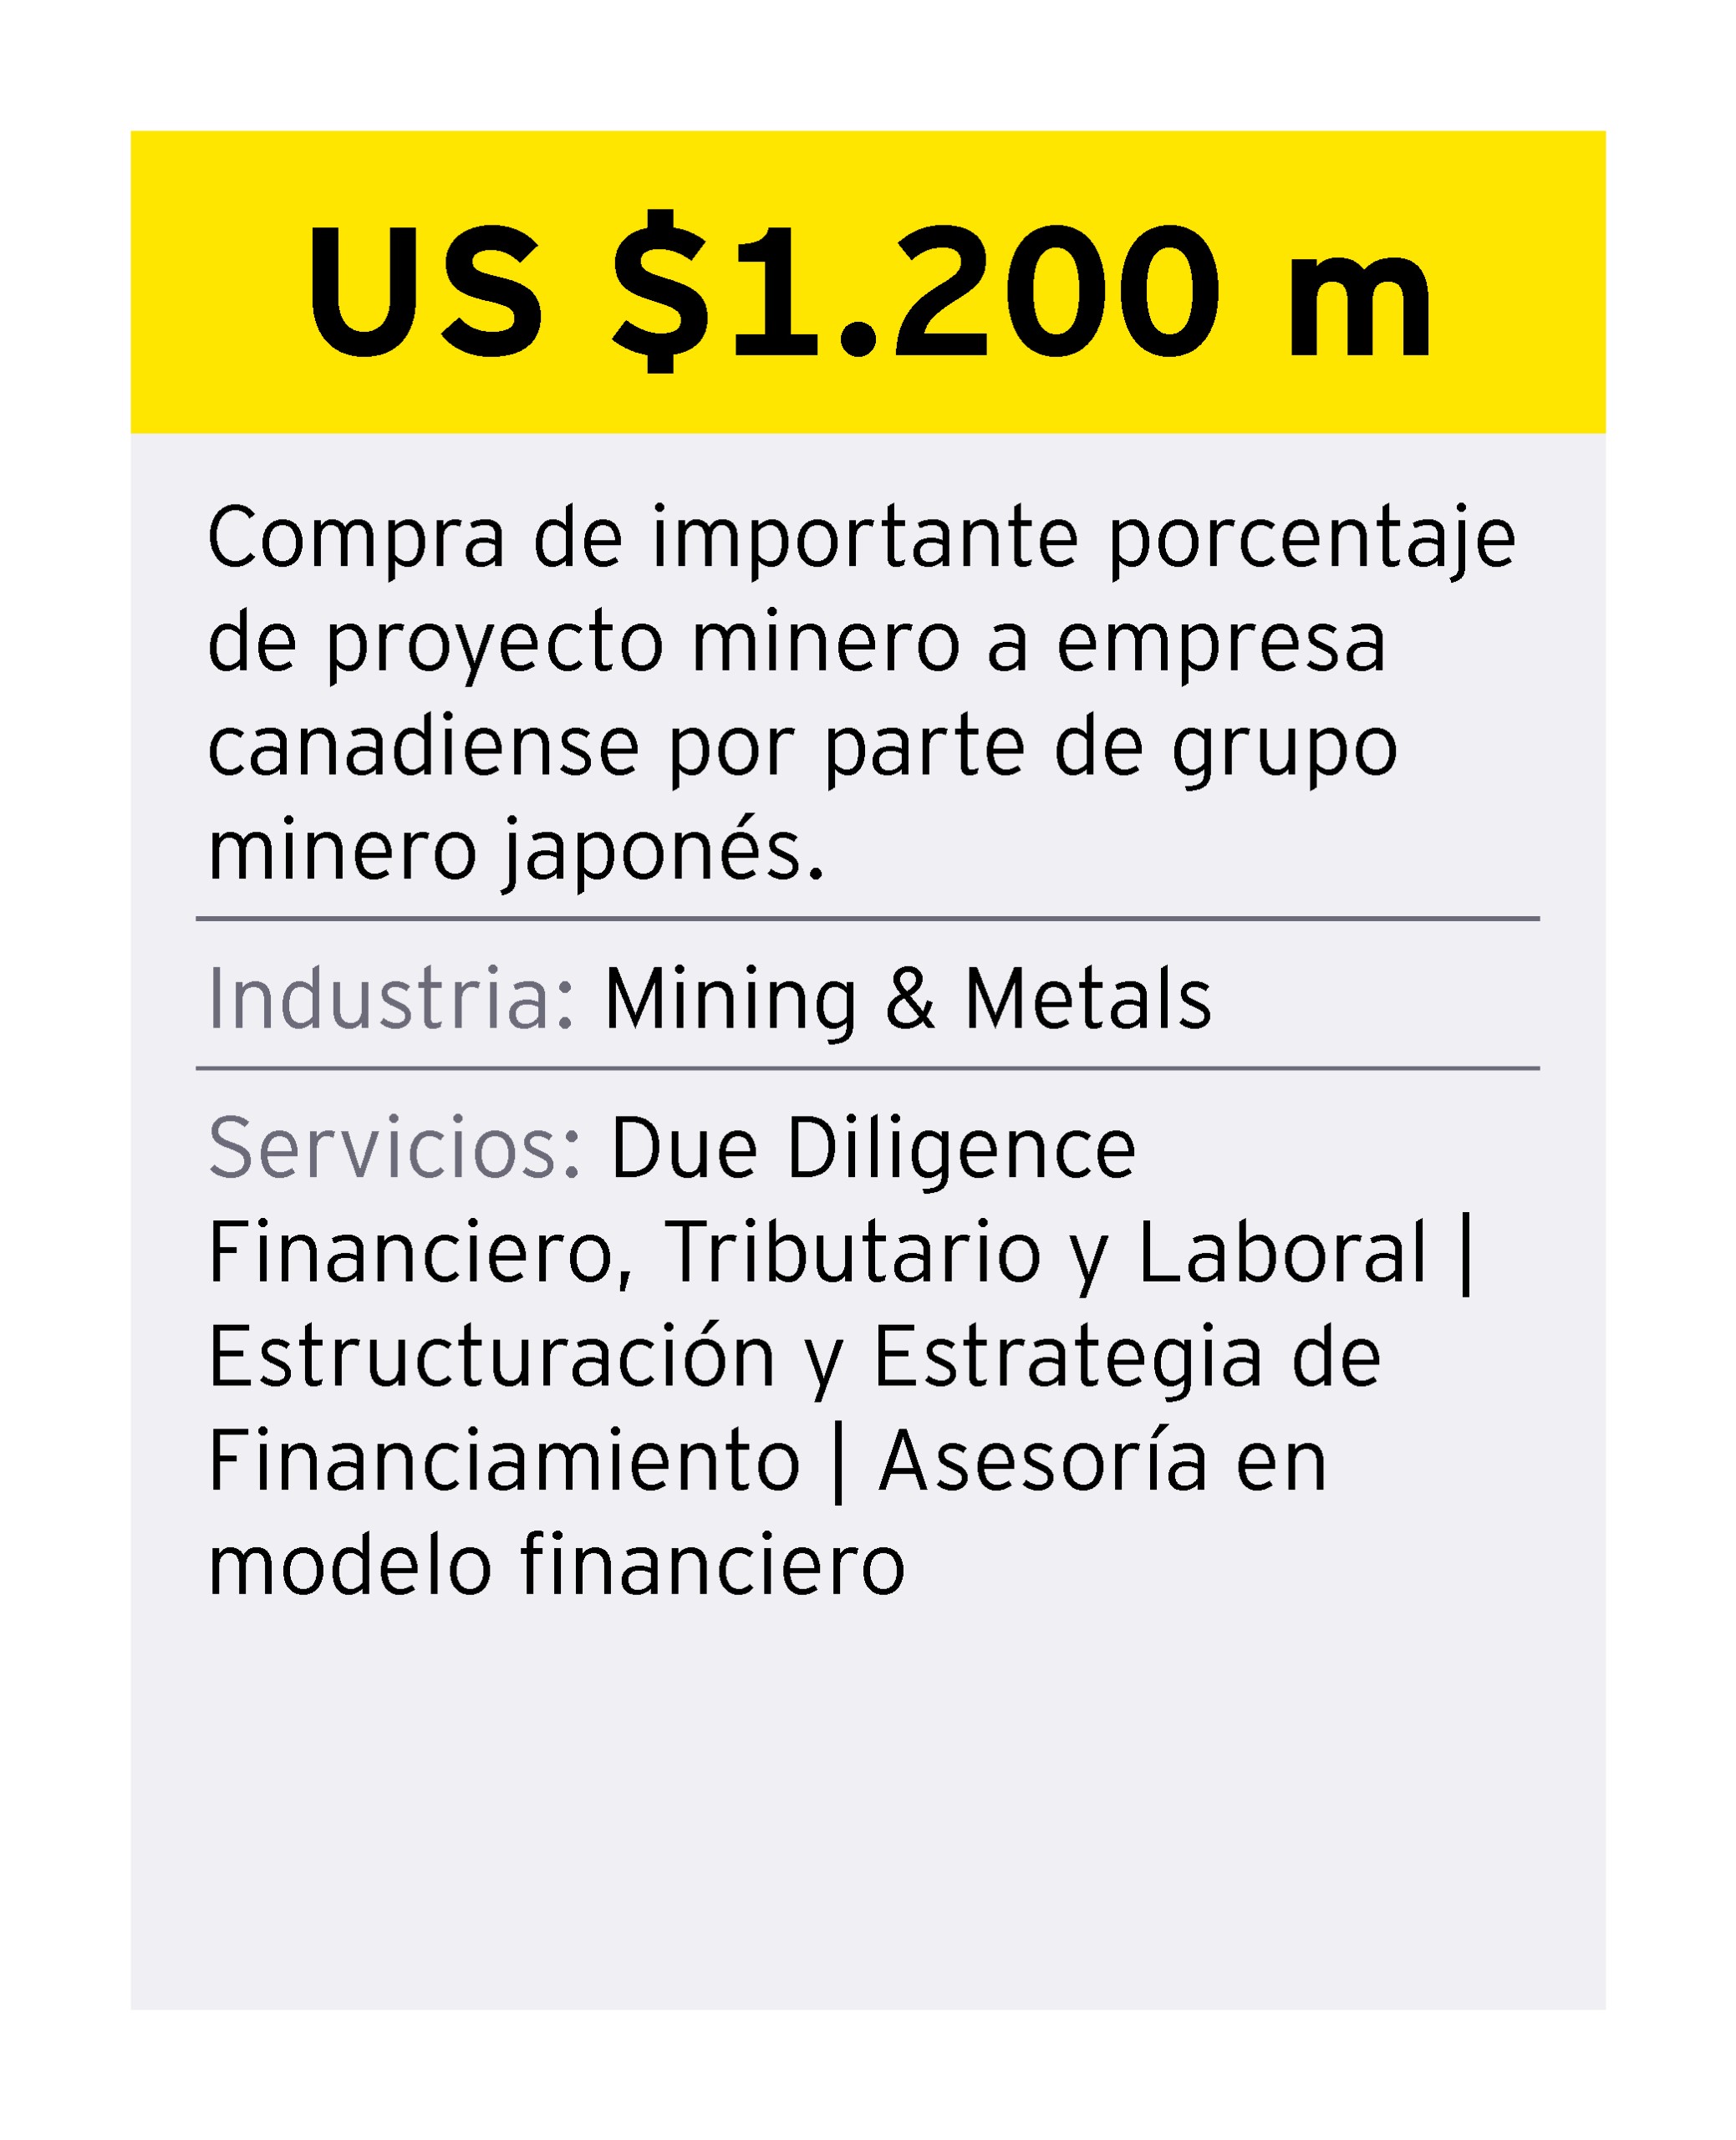 ey-chile-credencial-1-mining-and-metals